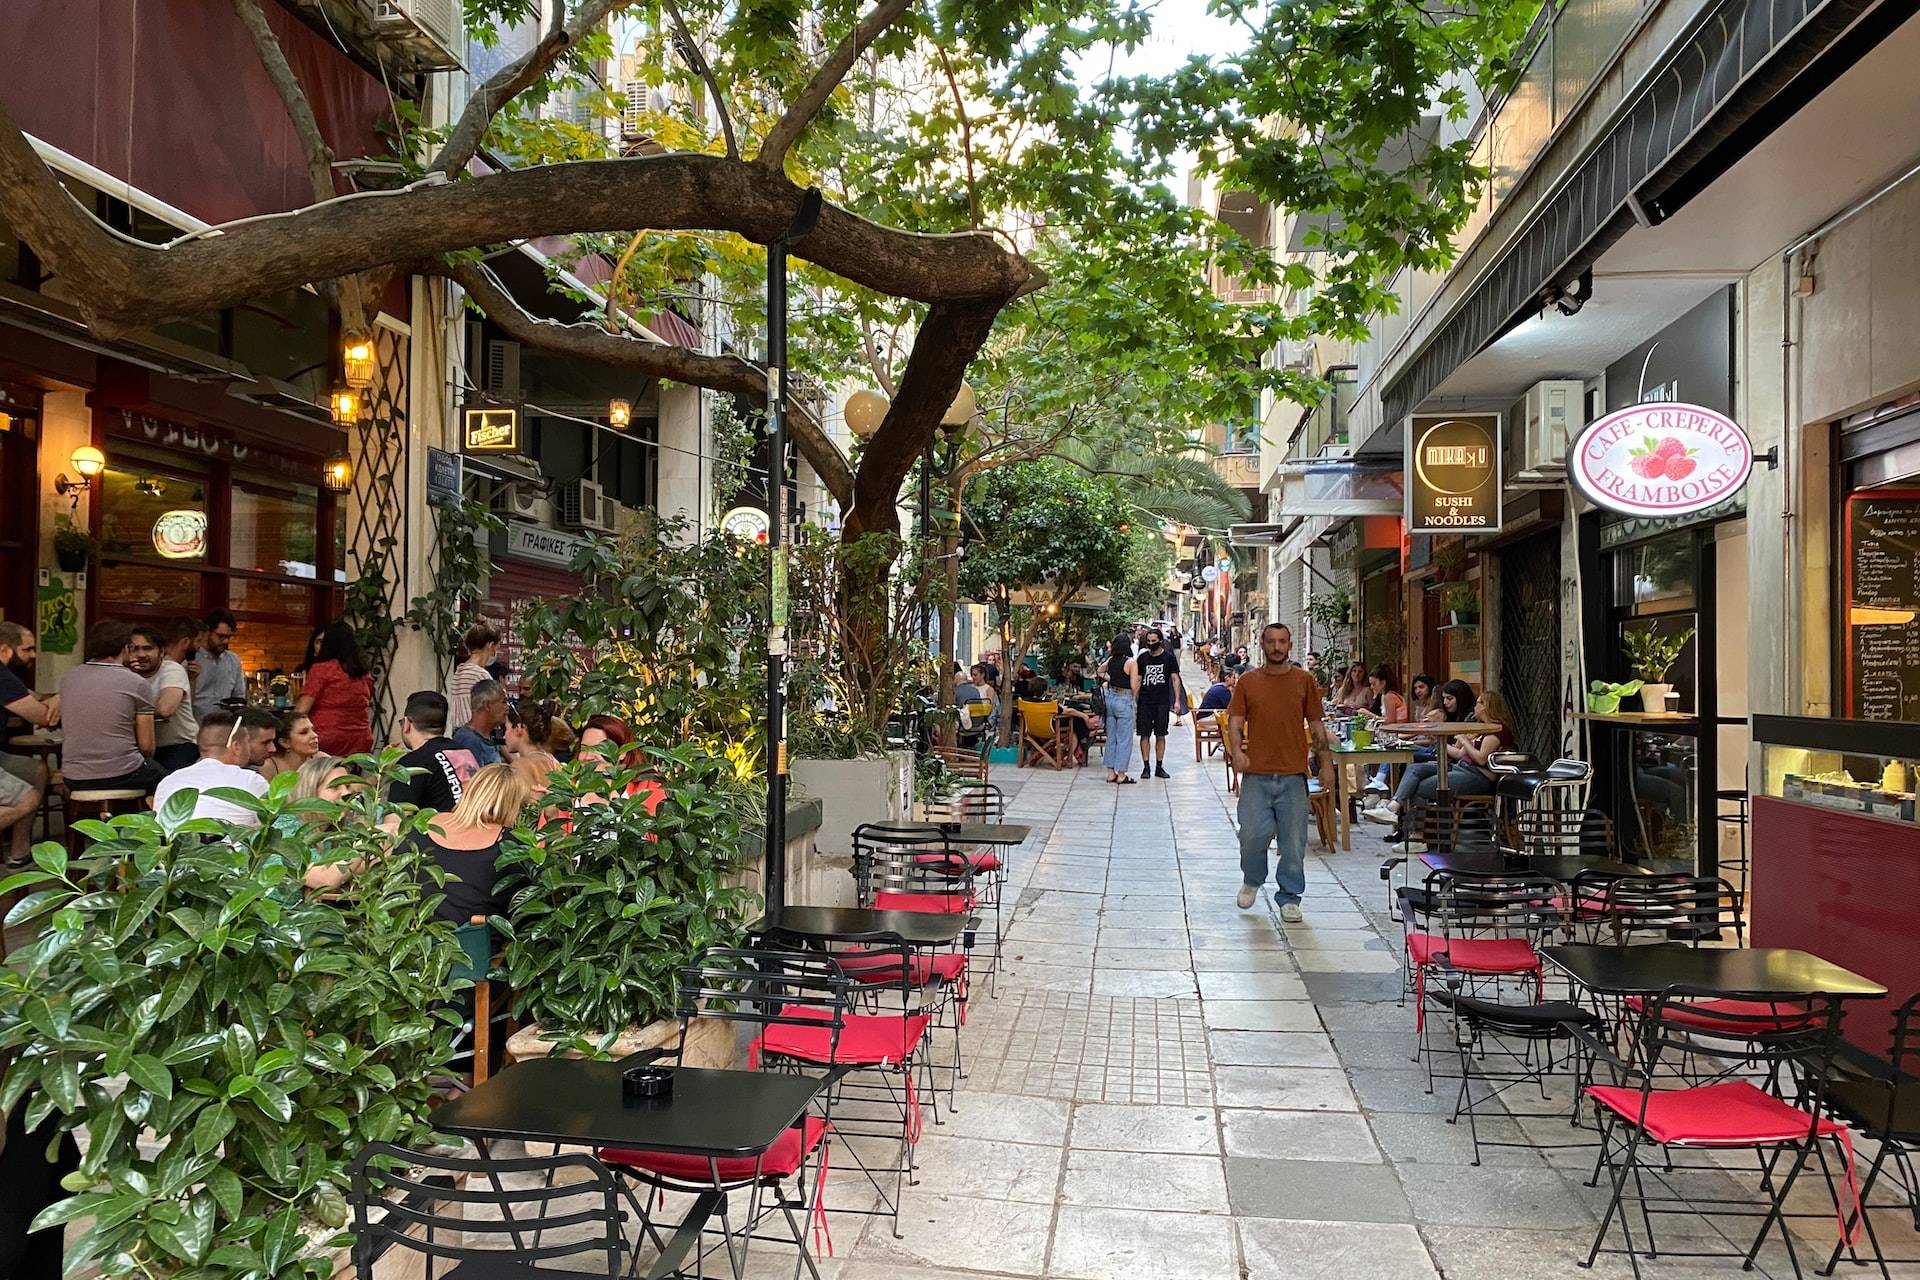 a group of people walking down a sidewalk next to tables and chairs